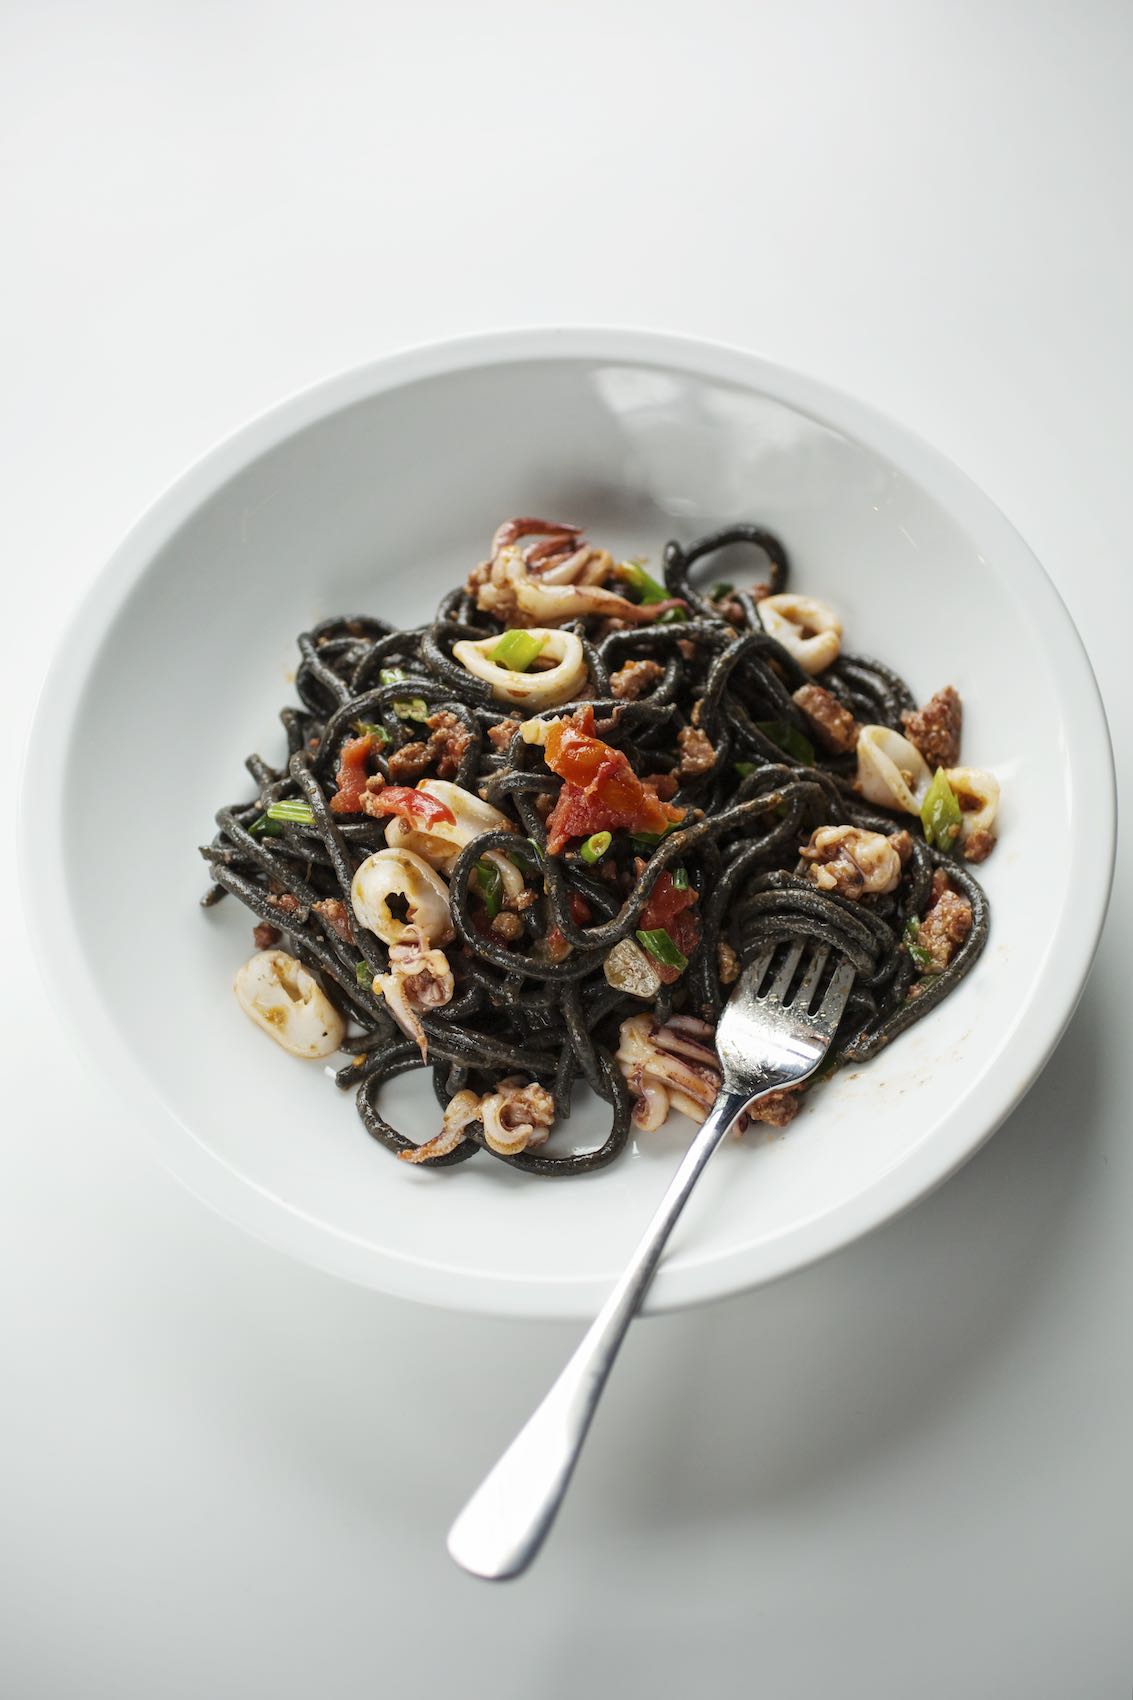 Jody Horton Photography - Squid ink spaghetti with calamari in a white bowl.